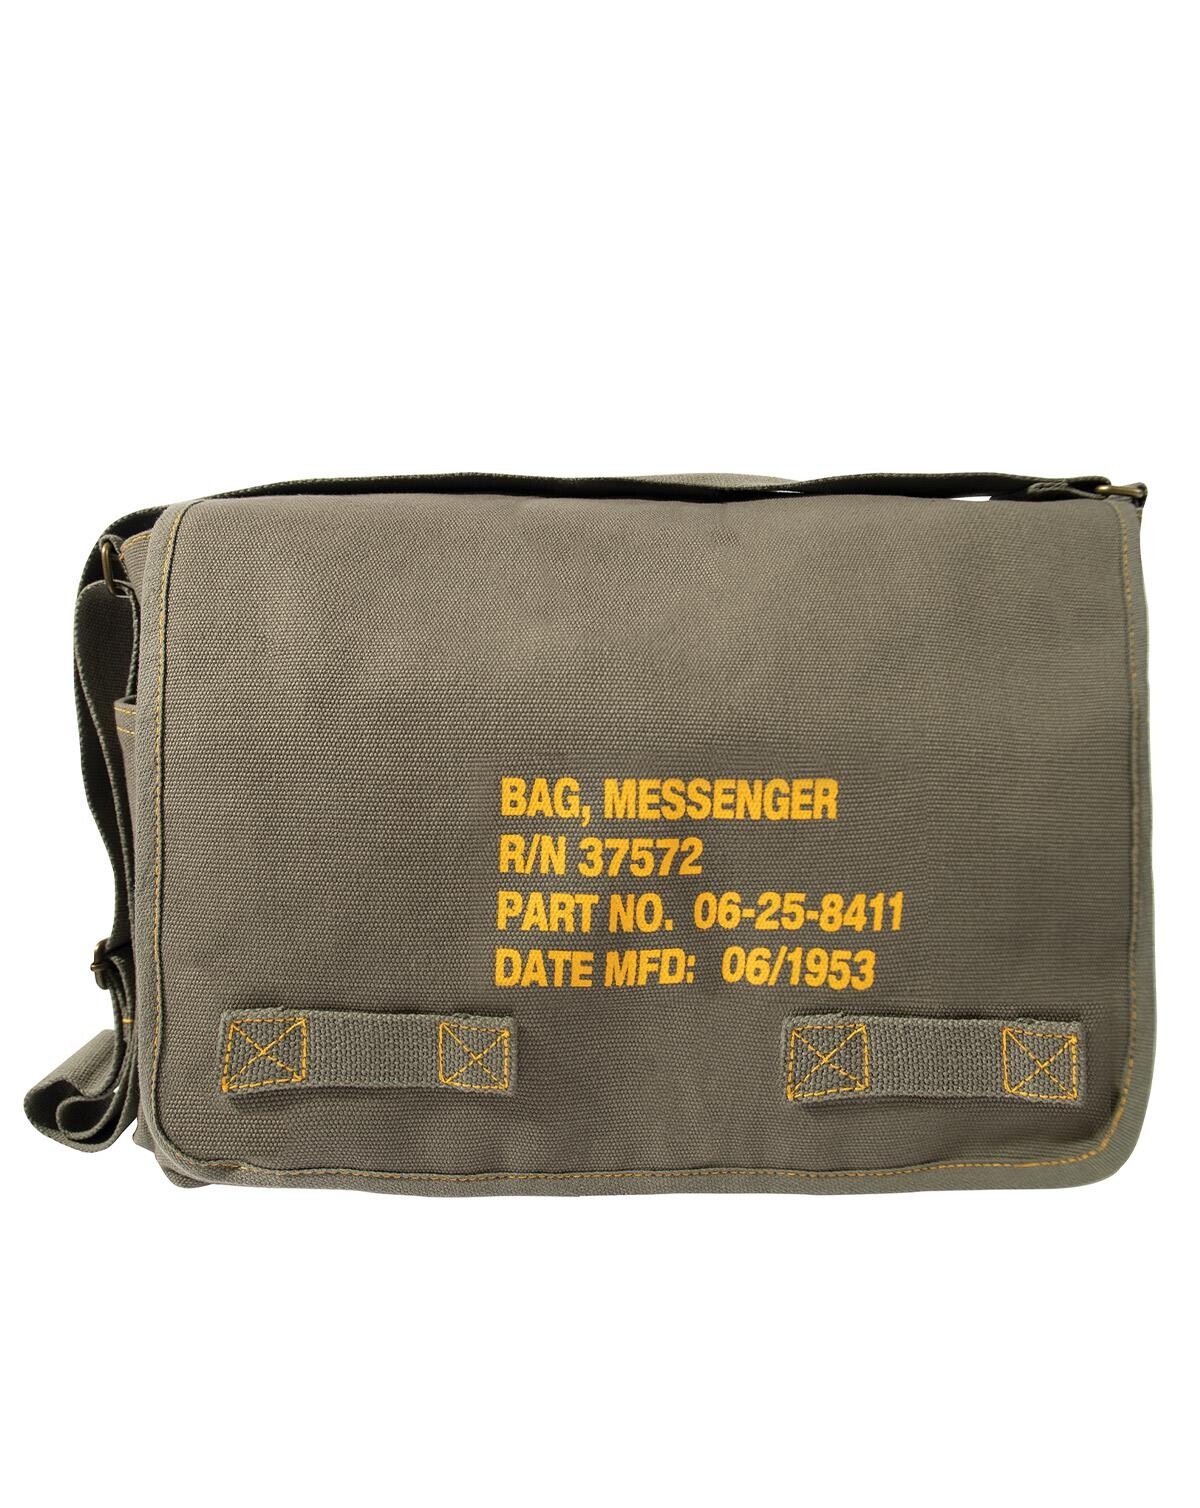 #2 - Rothco Heavyweight Canvas Classic Messenger Bag With Military Stencil (Oliven, One Size)